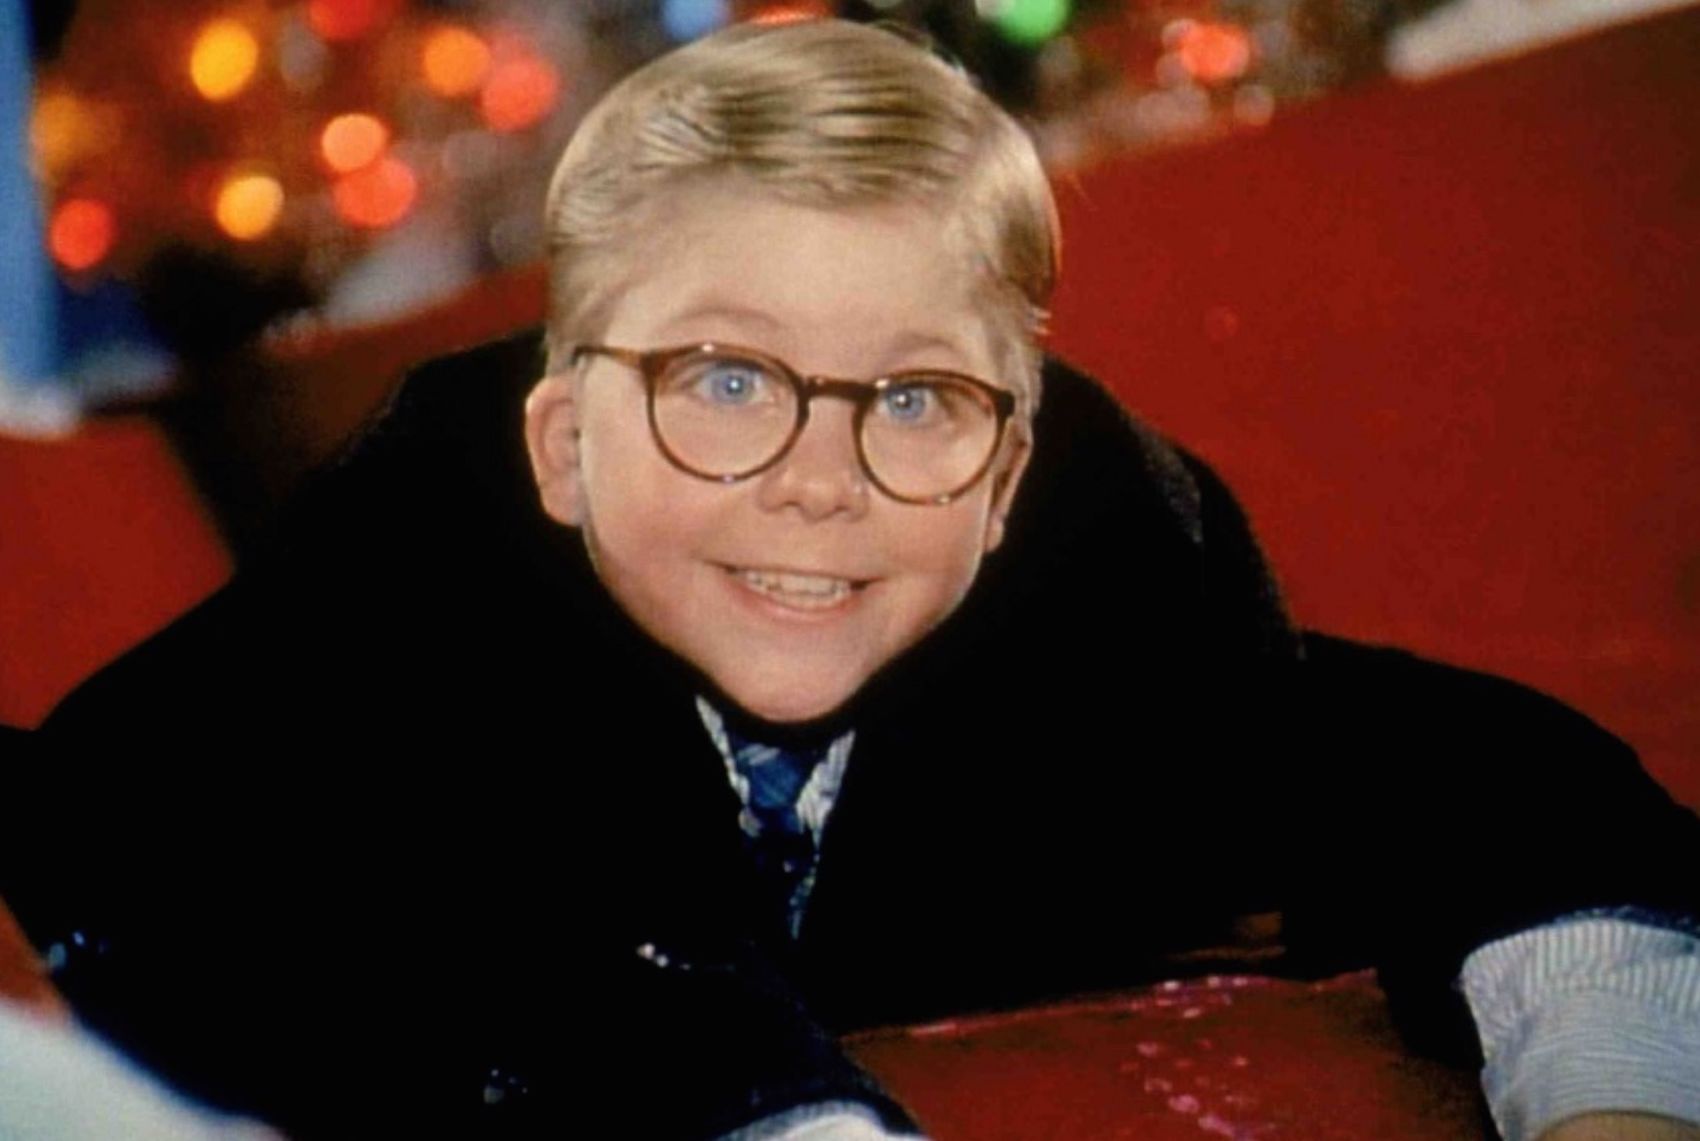 Here’s TBS & TNT’s Holiday-Themed Marathon Lineup of Your Favorite Shows and Films Including Elf, & A Christmas Story